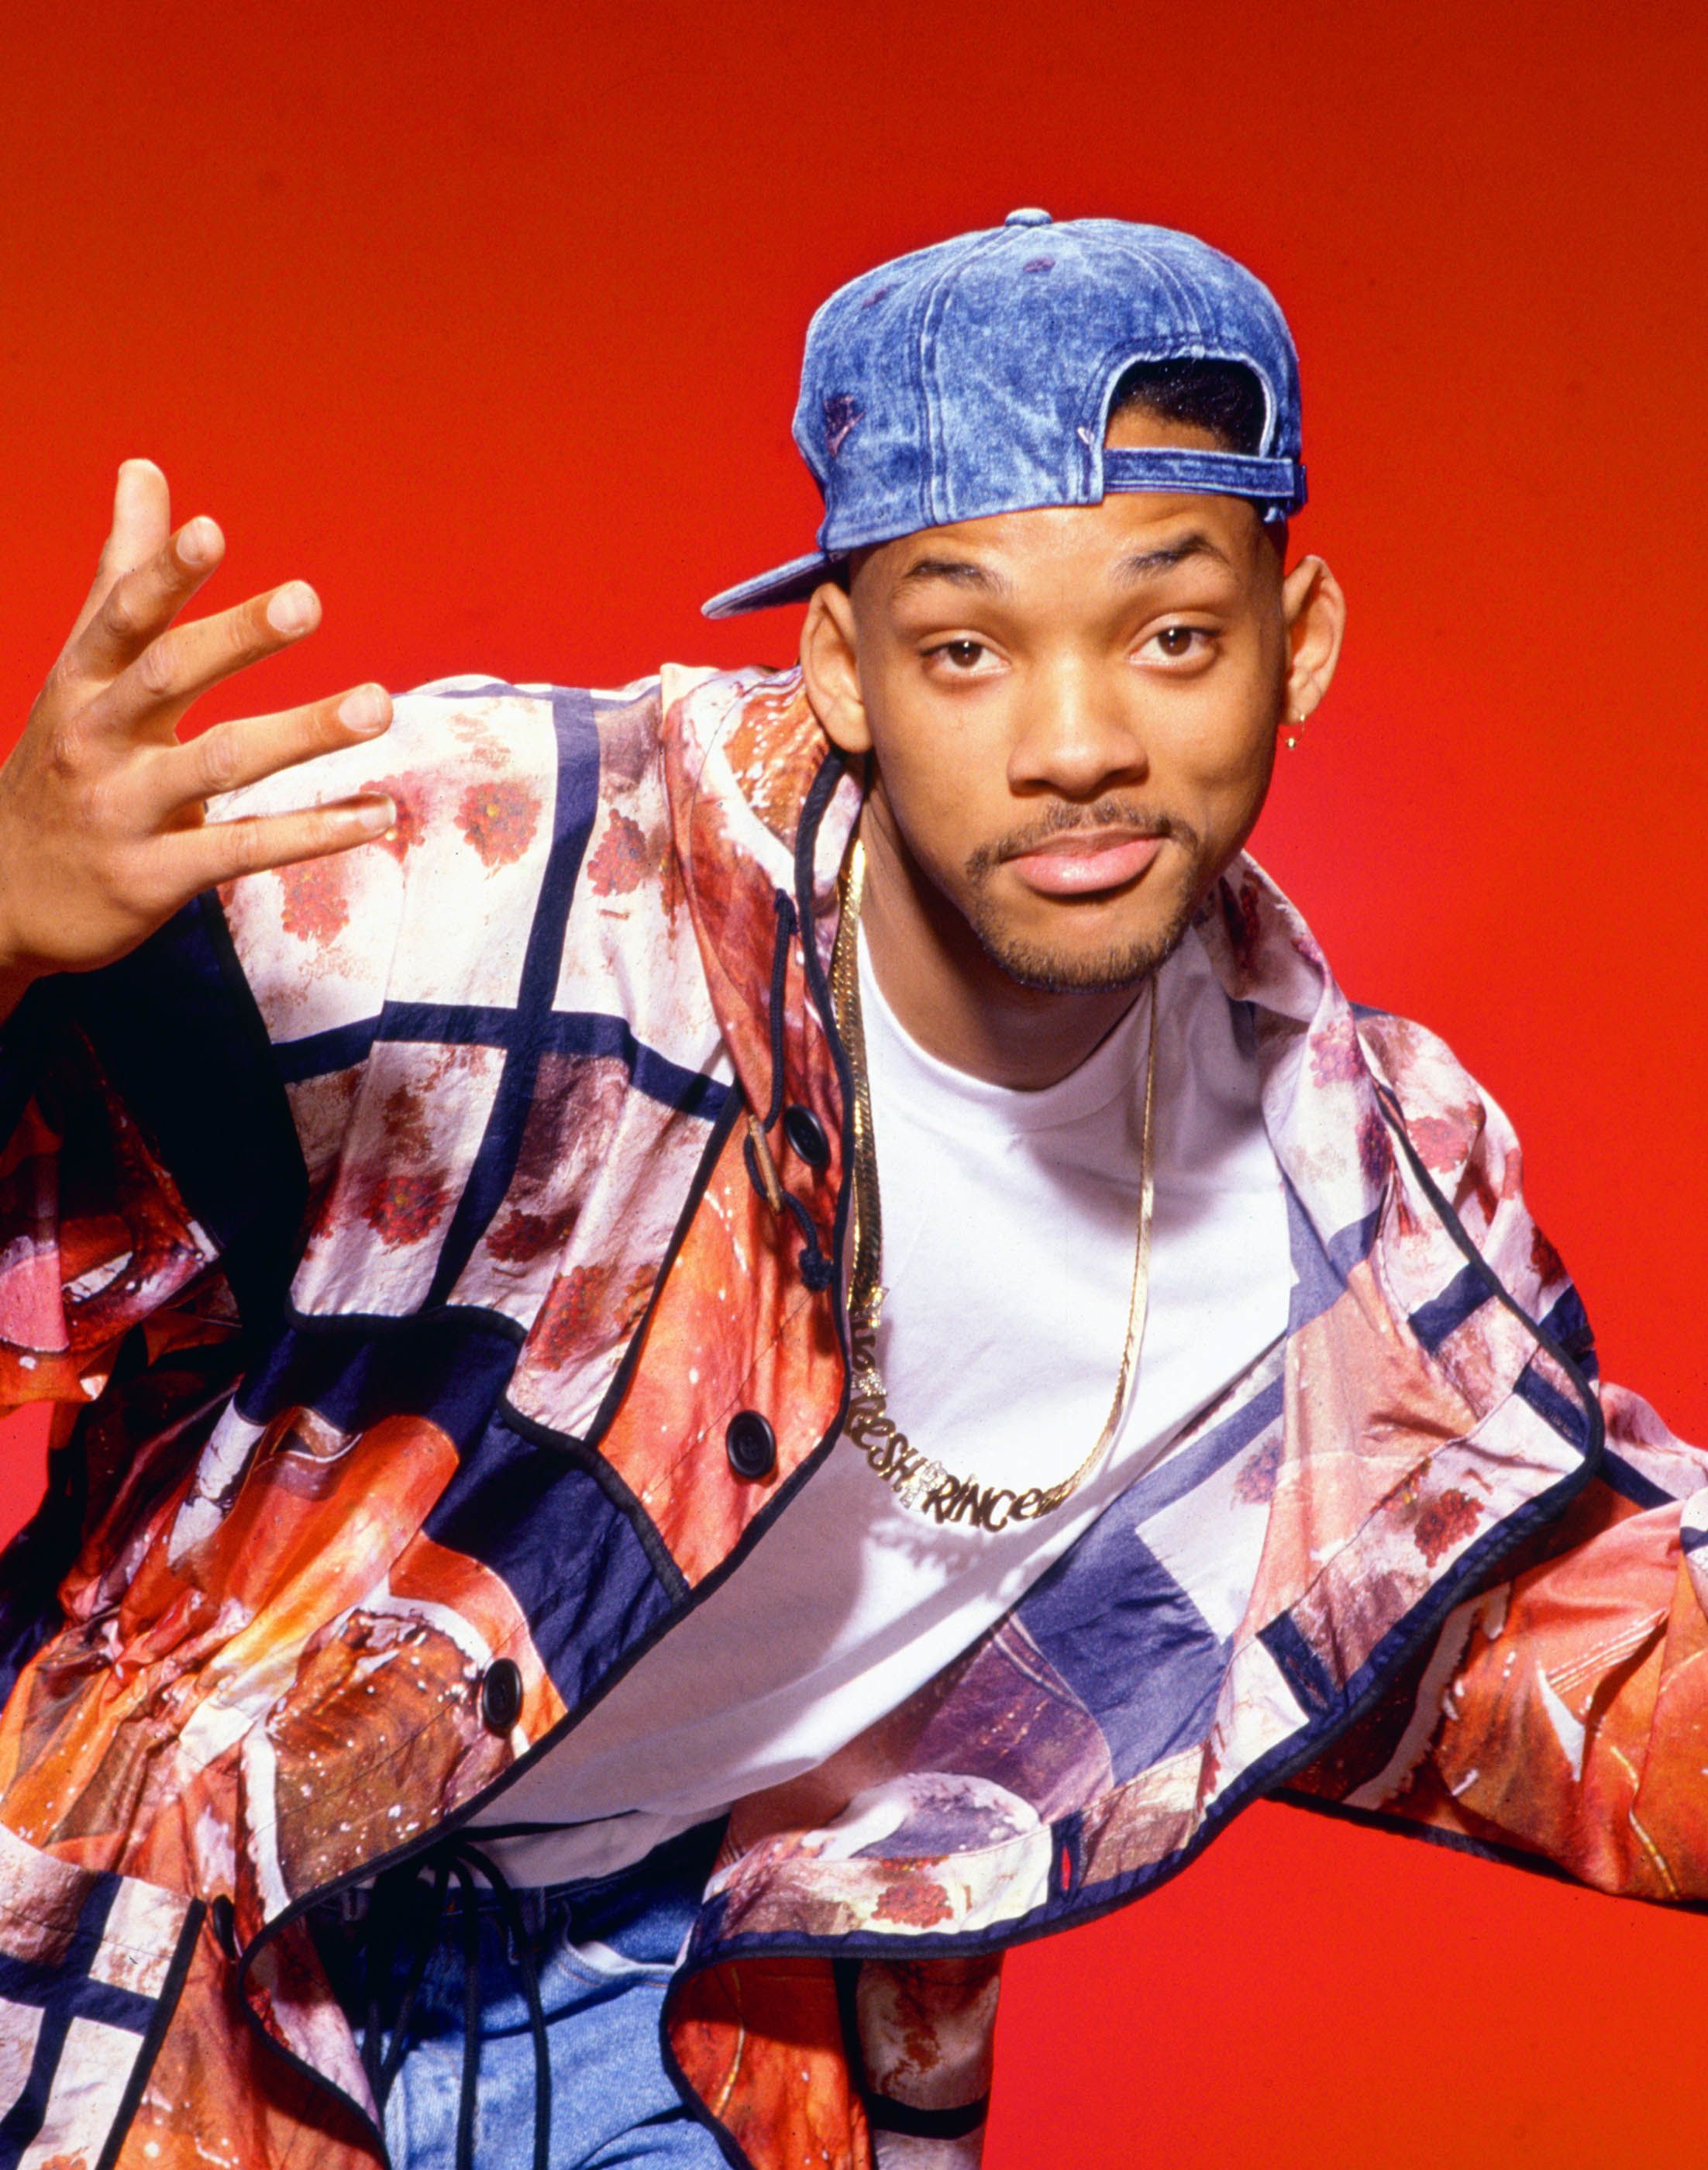 40 Rare Will Smith Photos - Pictures of Will Smith Through the Years